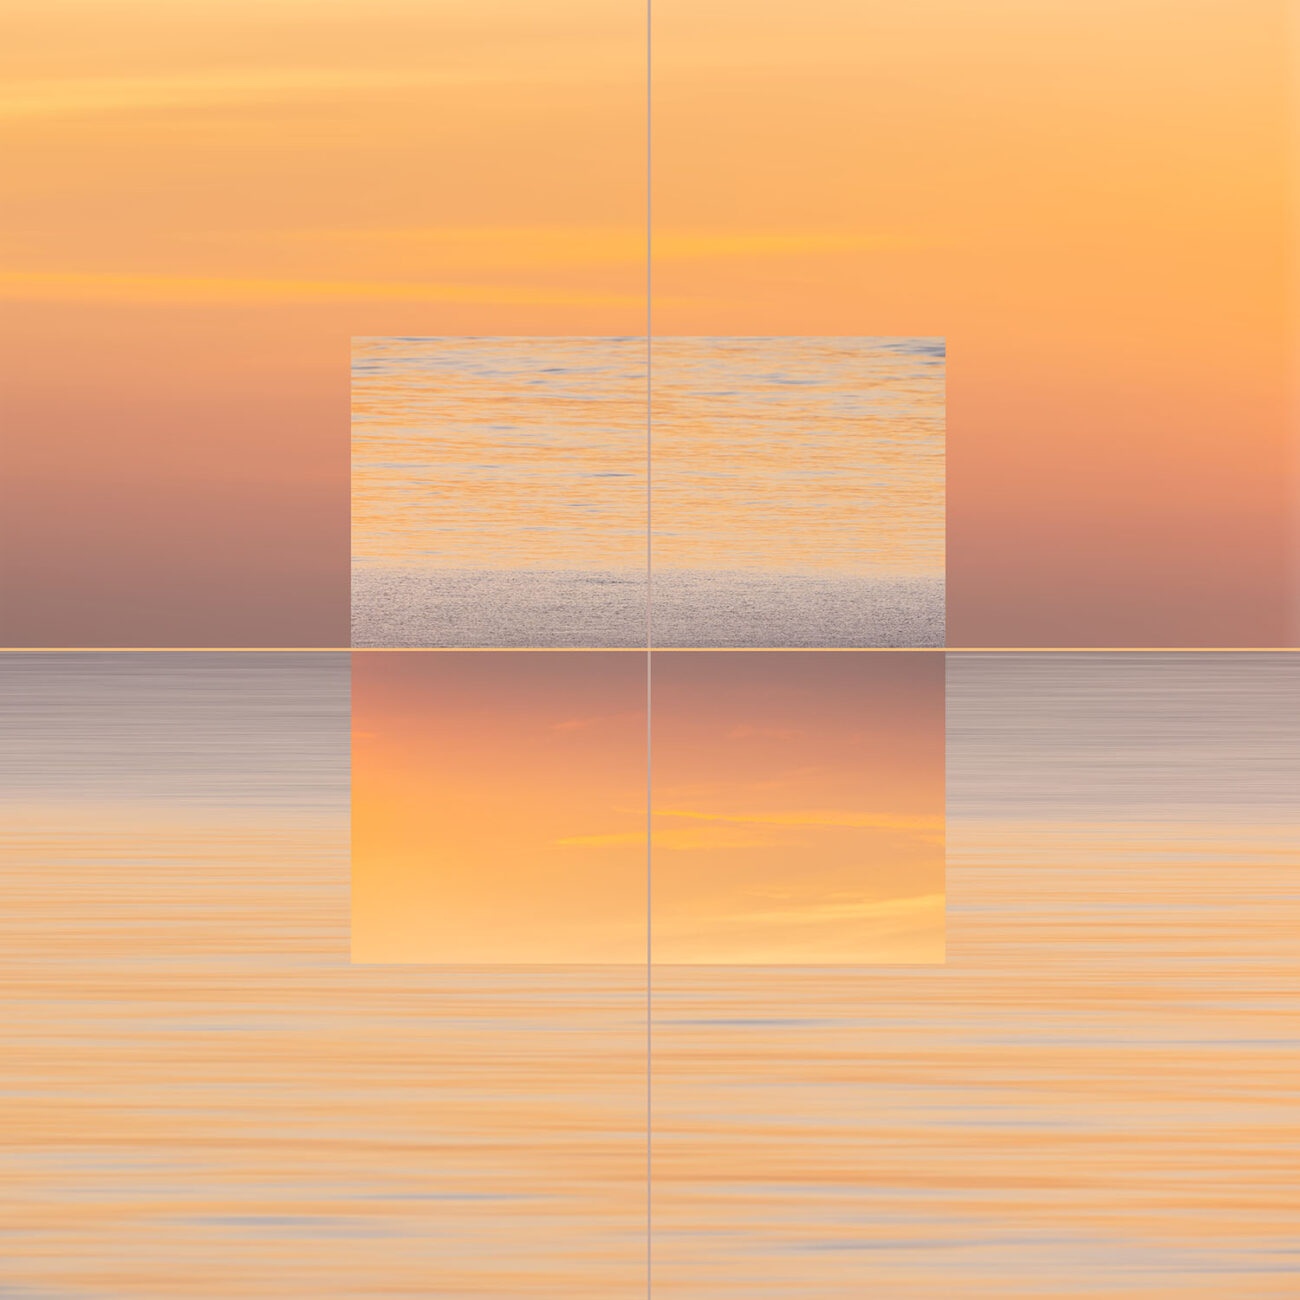 Composition with ocean and sky